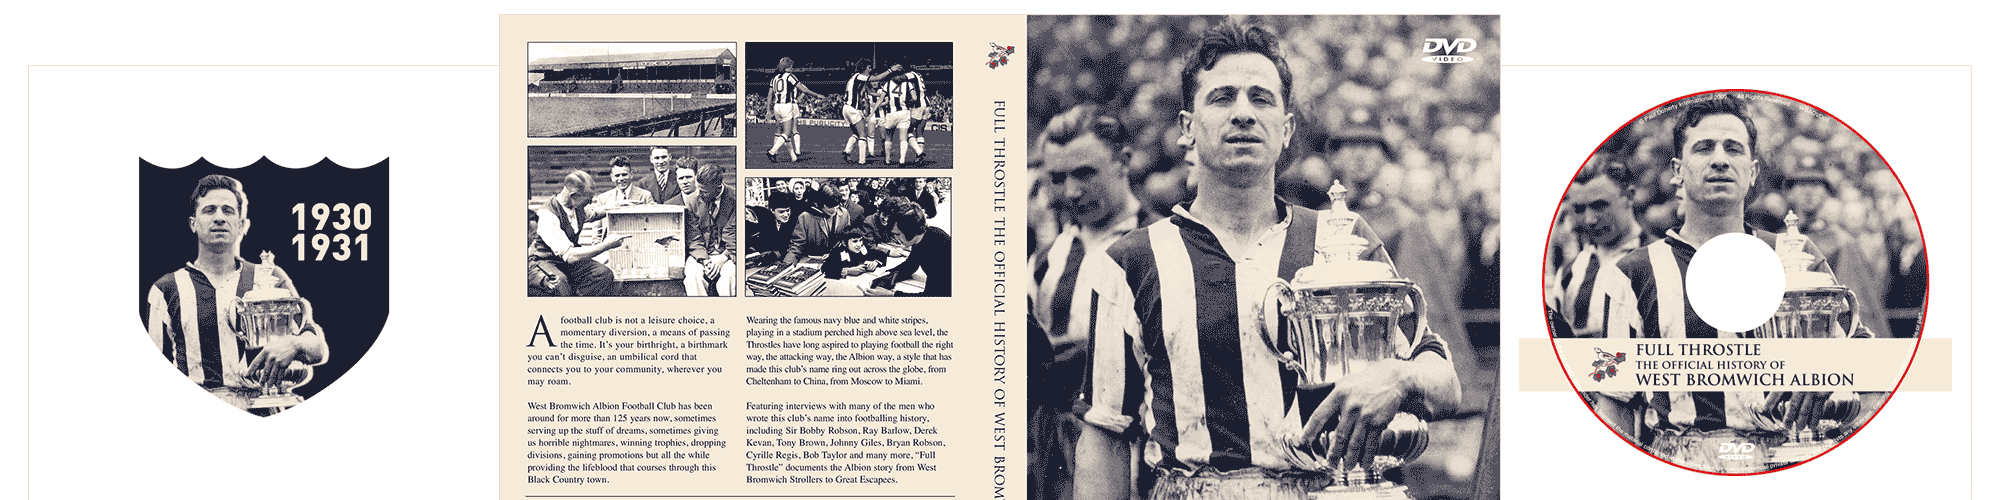 Screenshot of the West Bromwich Albion case study by Michael Saunders